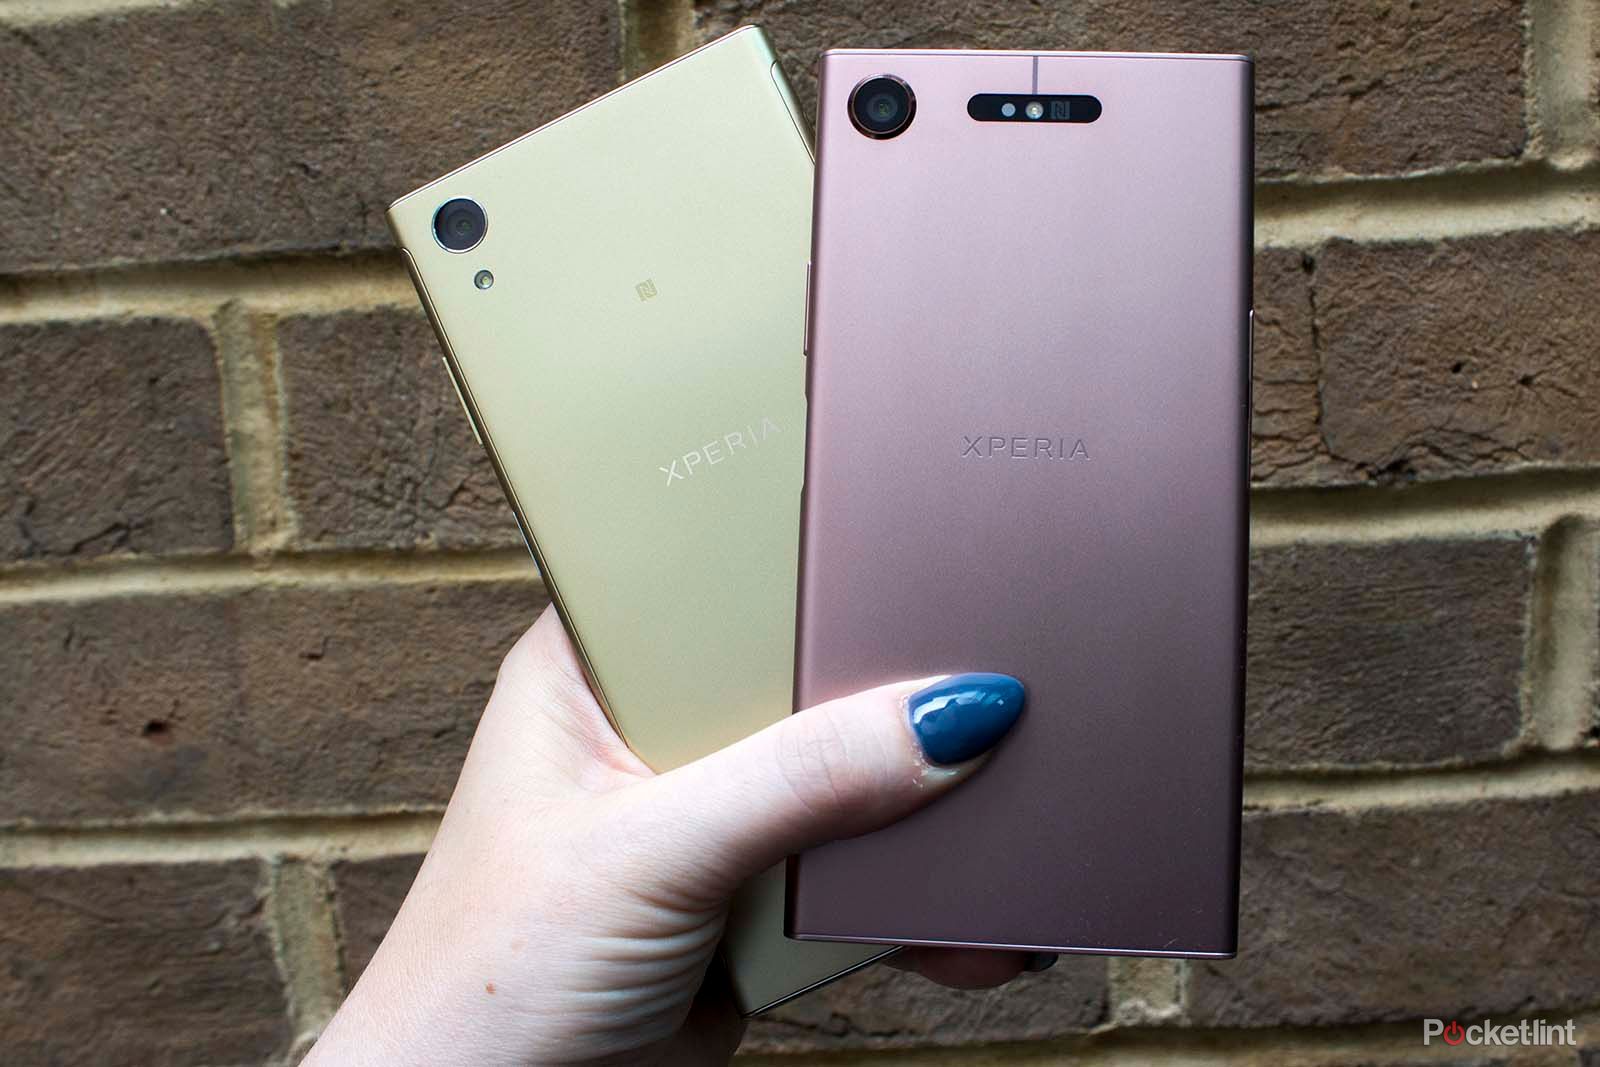 Sony may finally be changing its smartphone design image 1